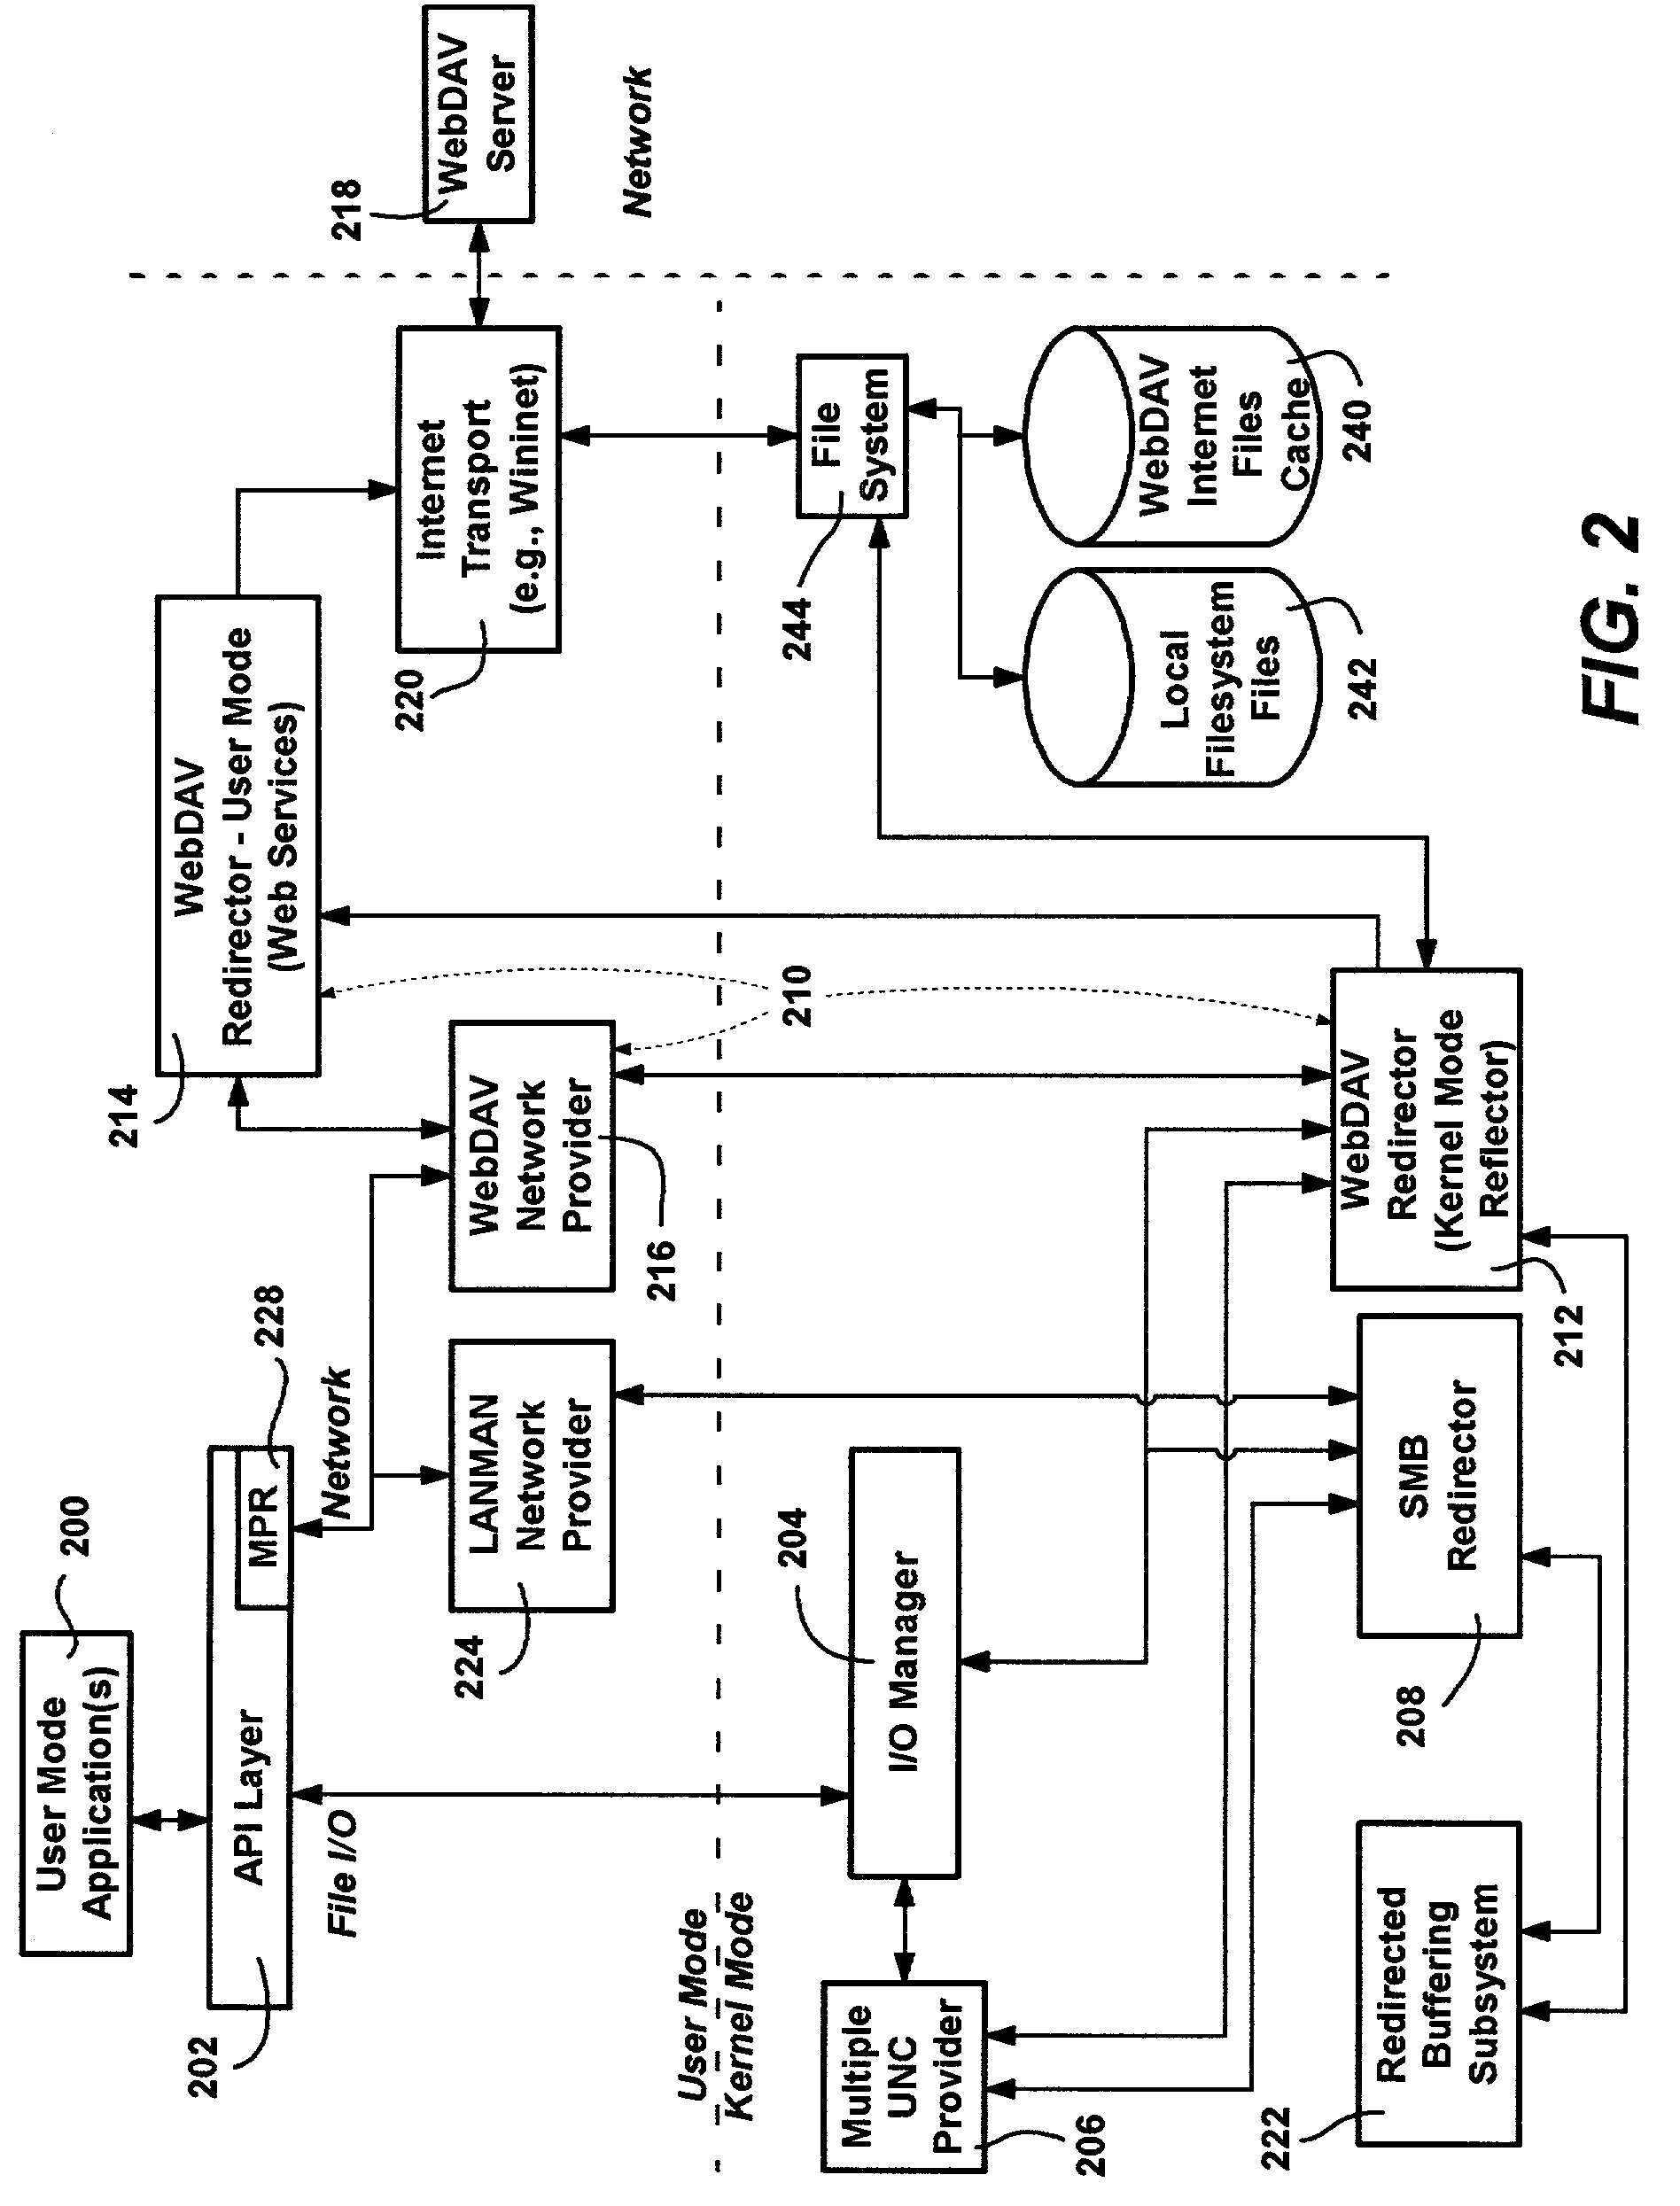 System and method for providing transparent access to distributed authoring and versioning files including encrypted files